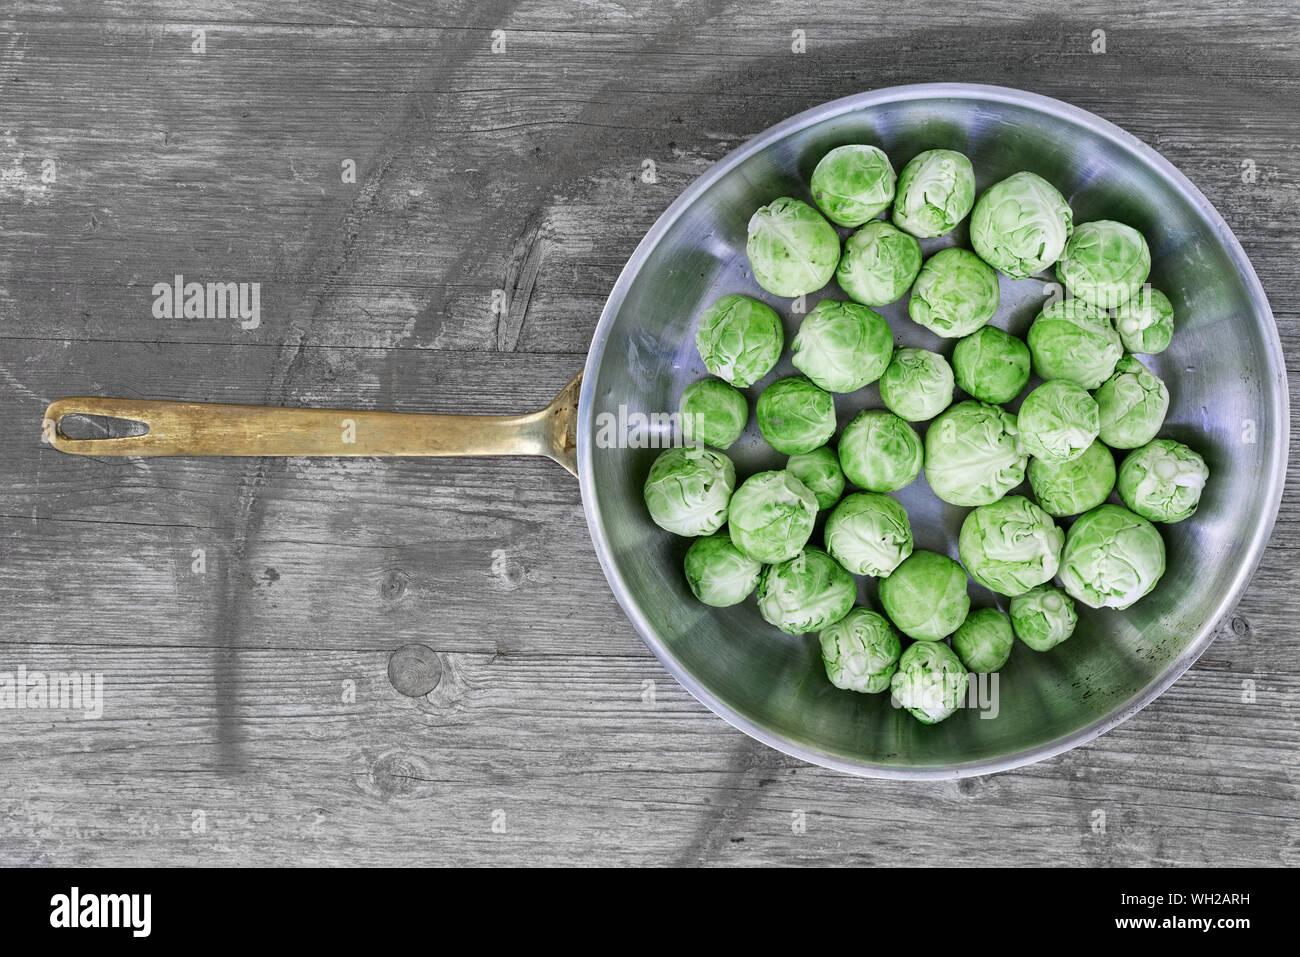 Directly Above View Of Cabbages In Cooking Utensil On Table Stock Photo